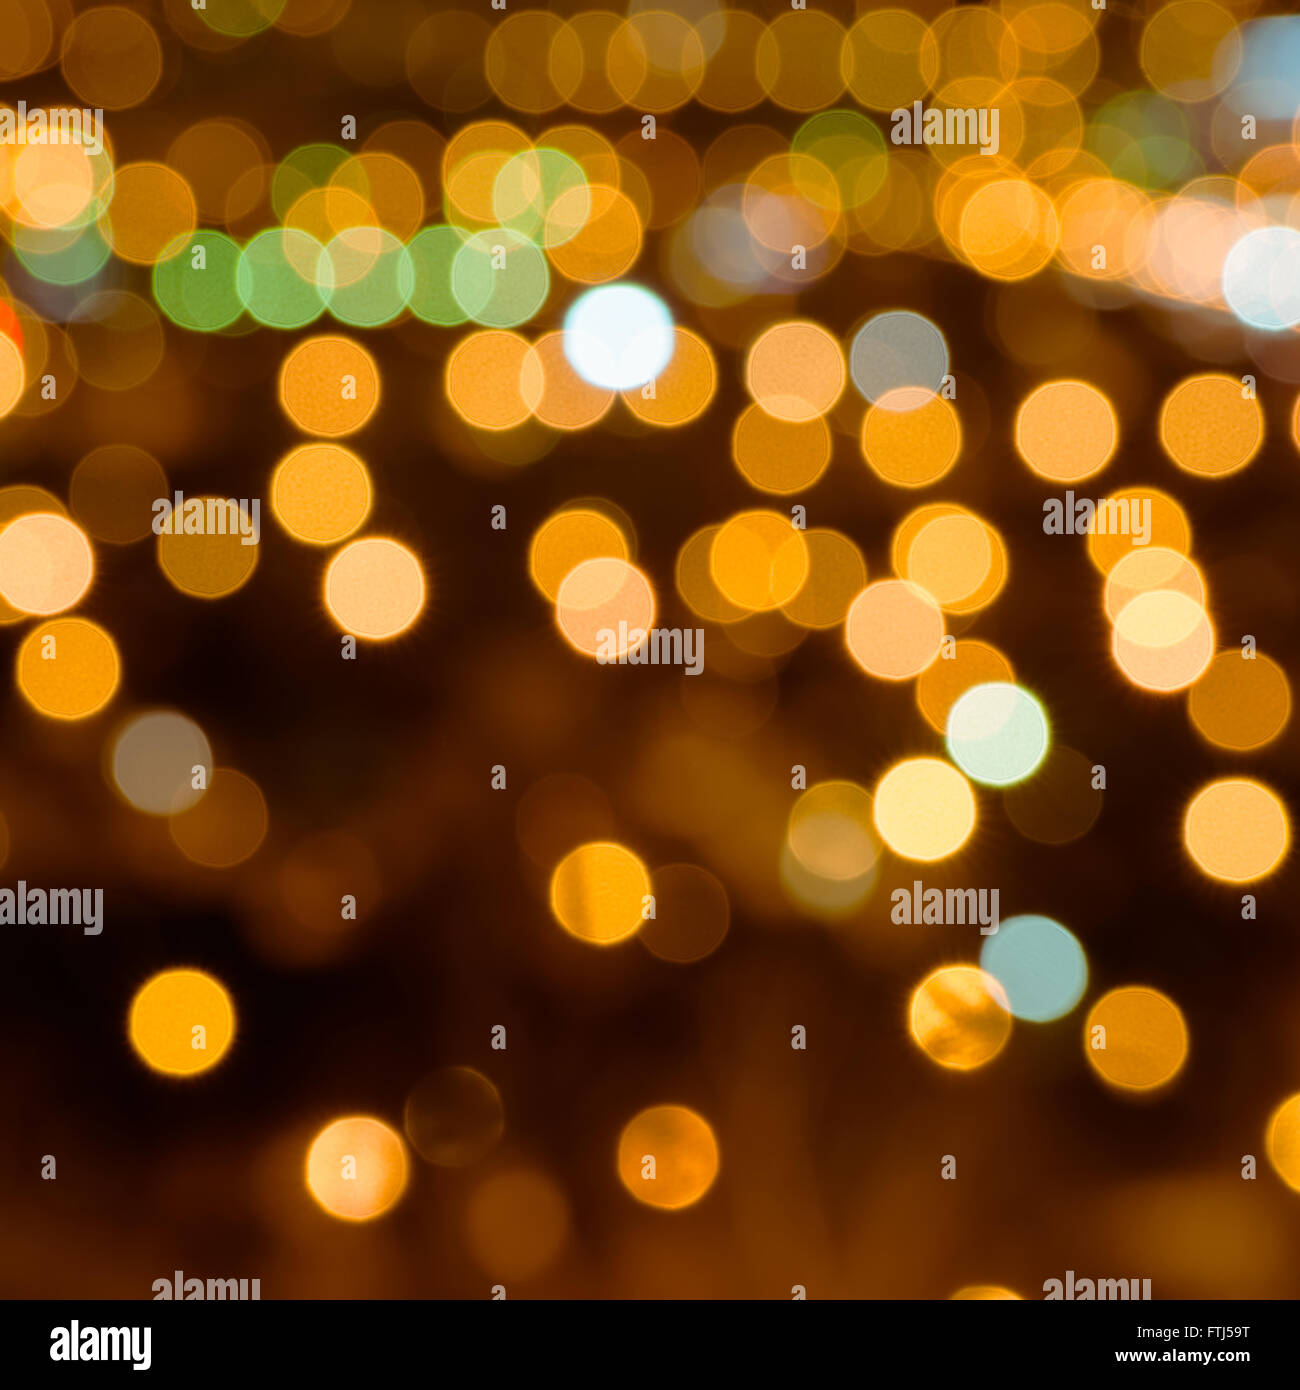 abstract festive background with bright golden lights, close up Stock Photo